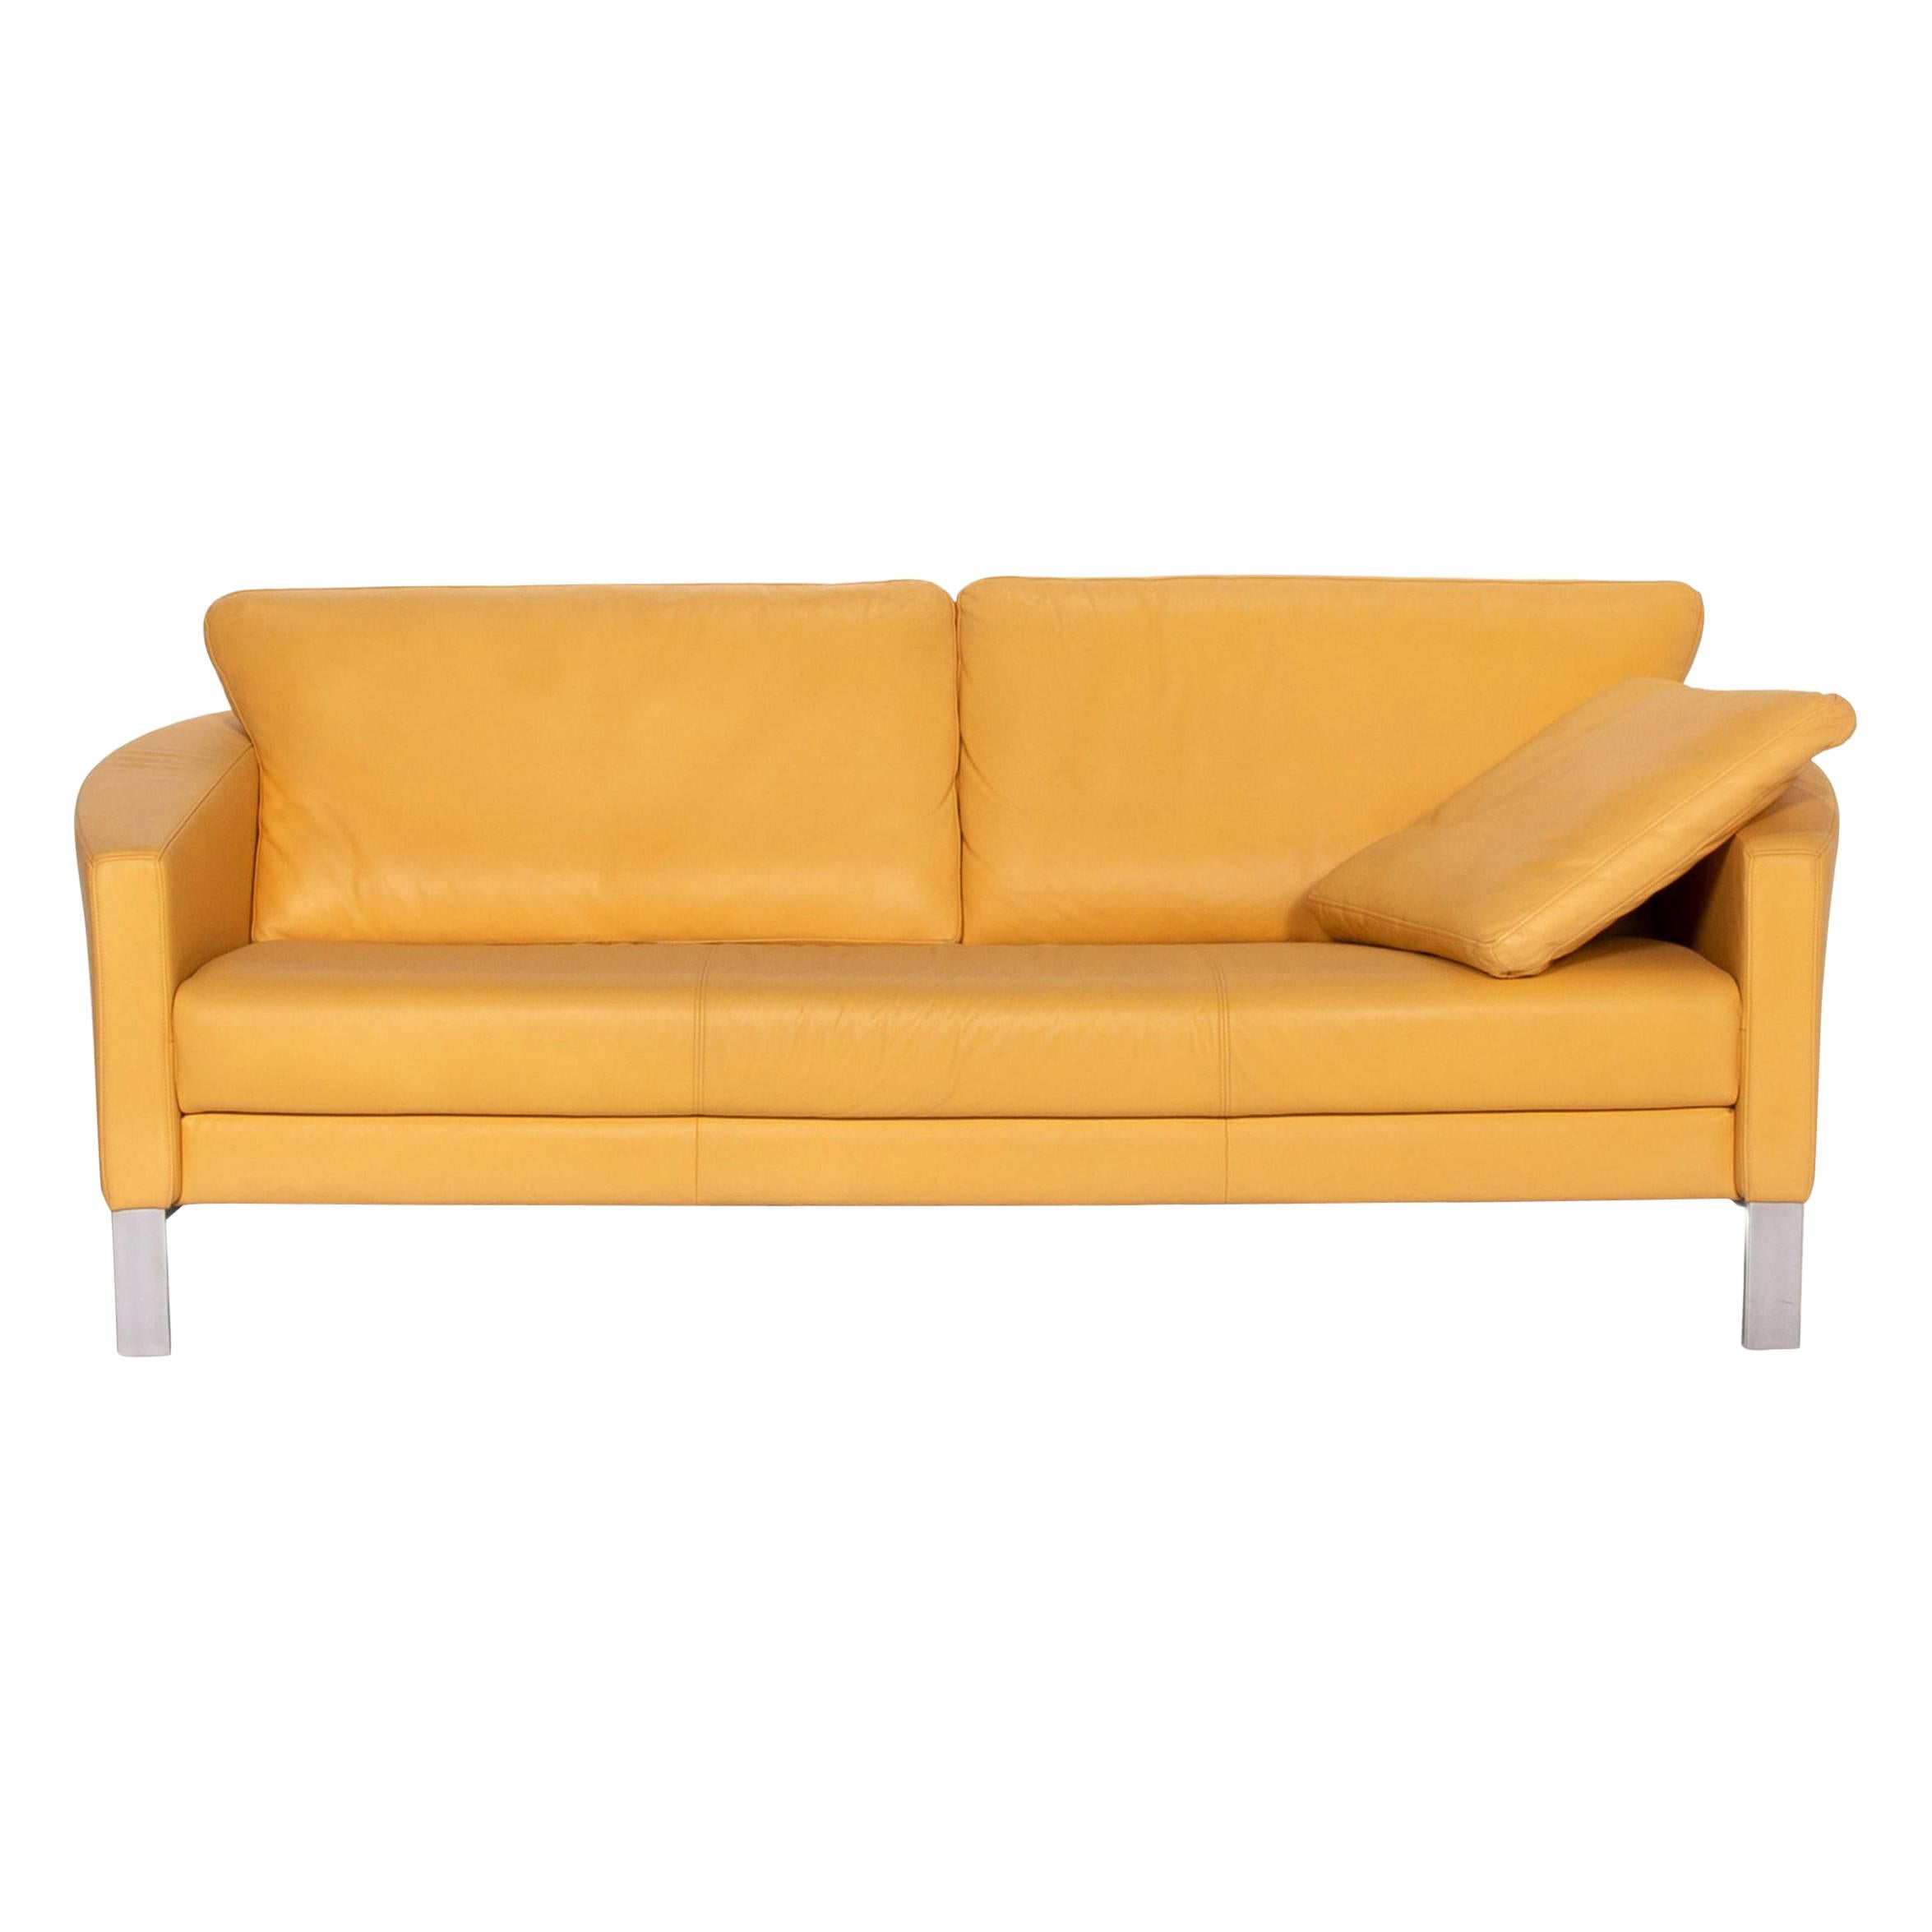 Rolf Benz Leather Sofa Yellow Three-Seat Couch For Sale